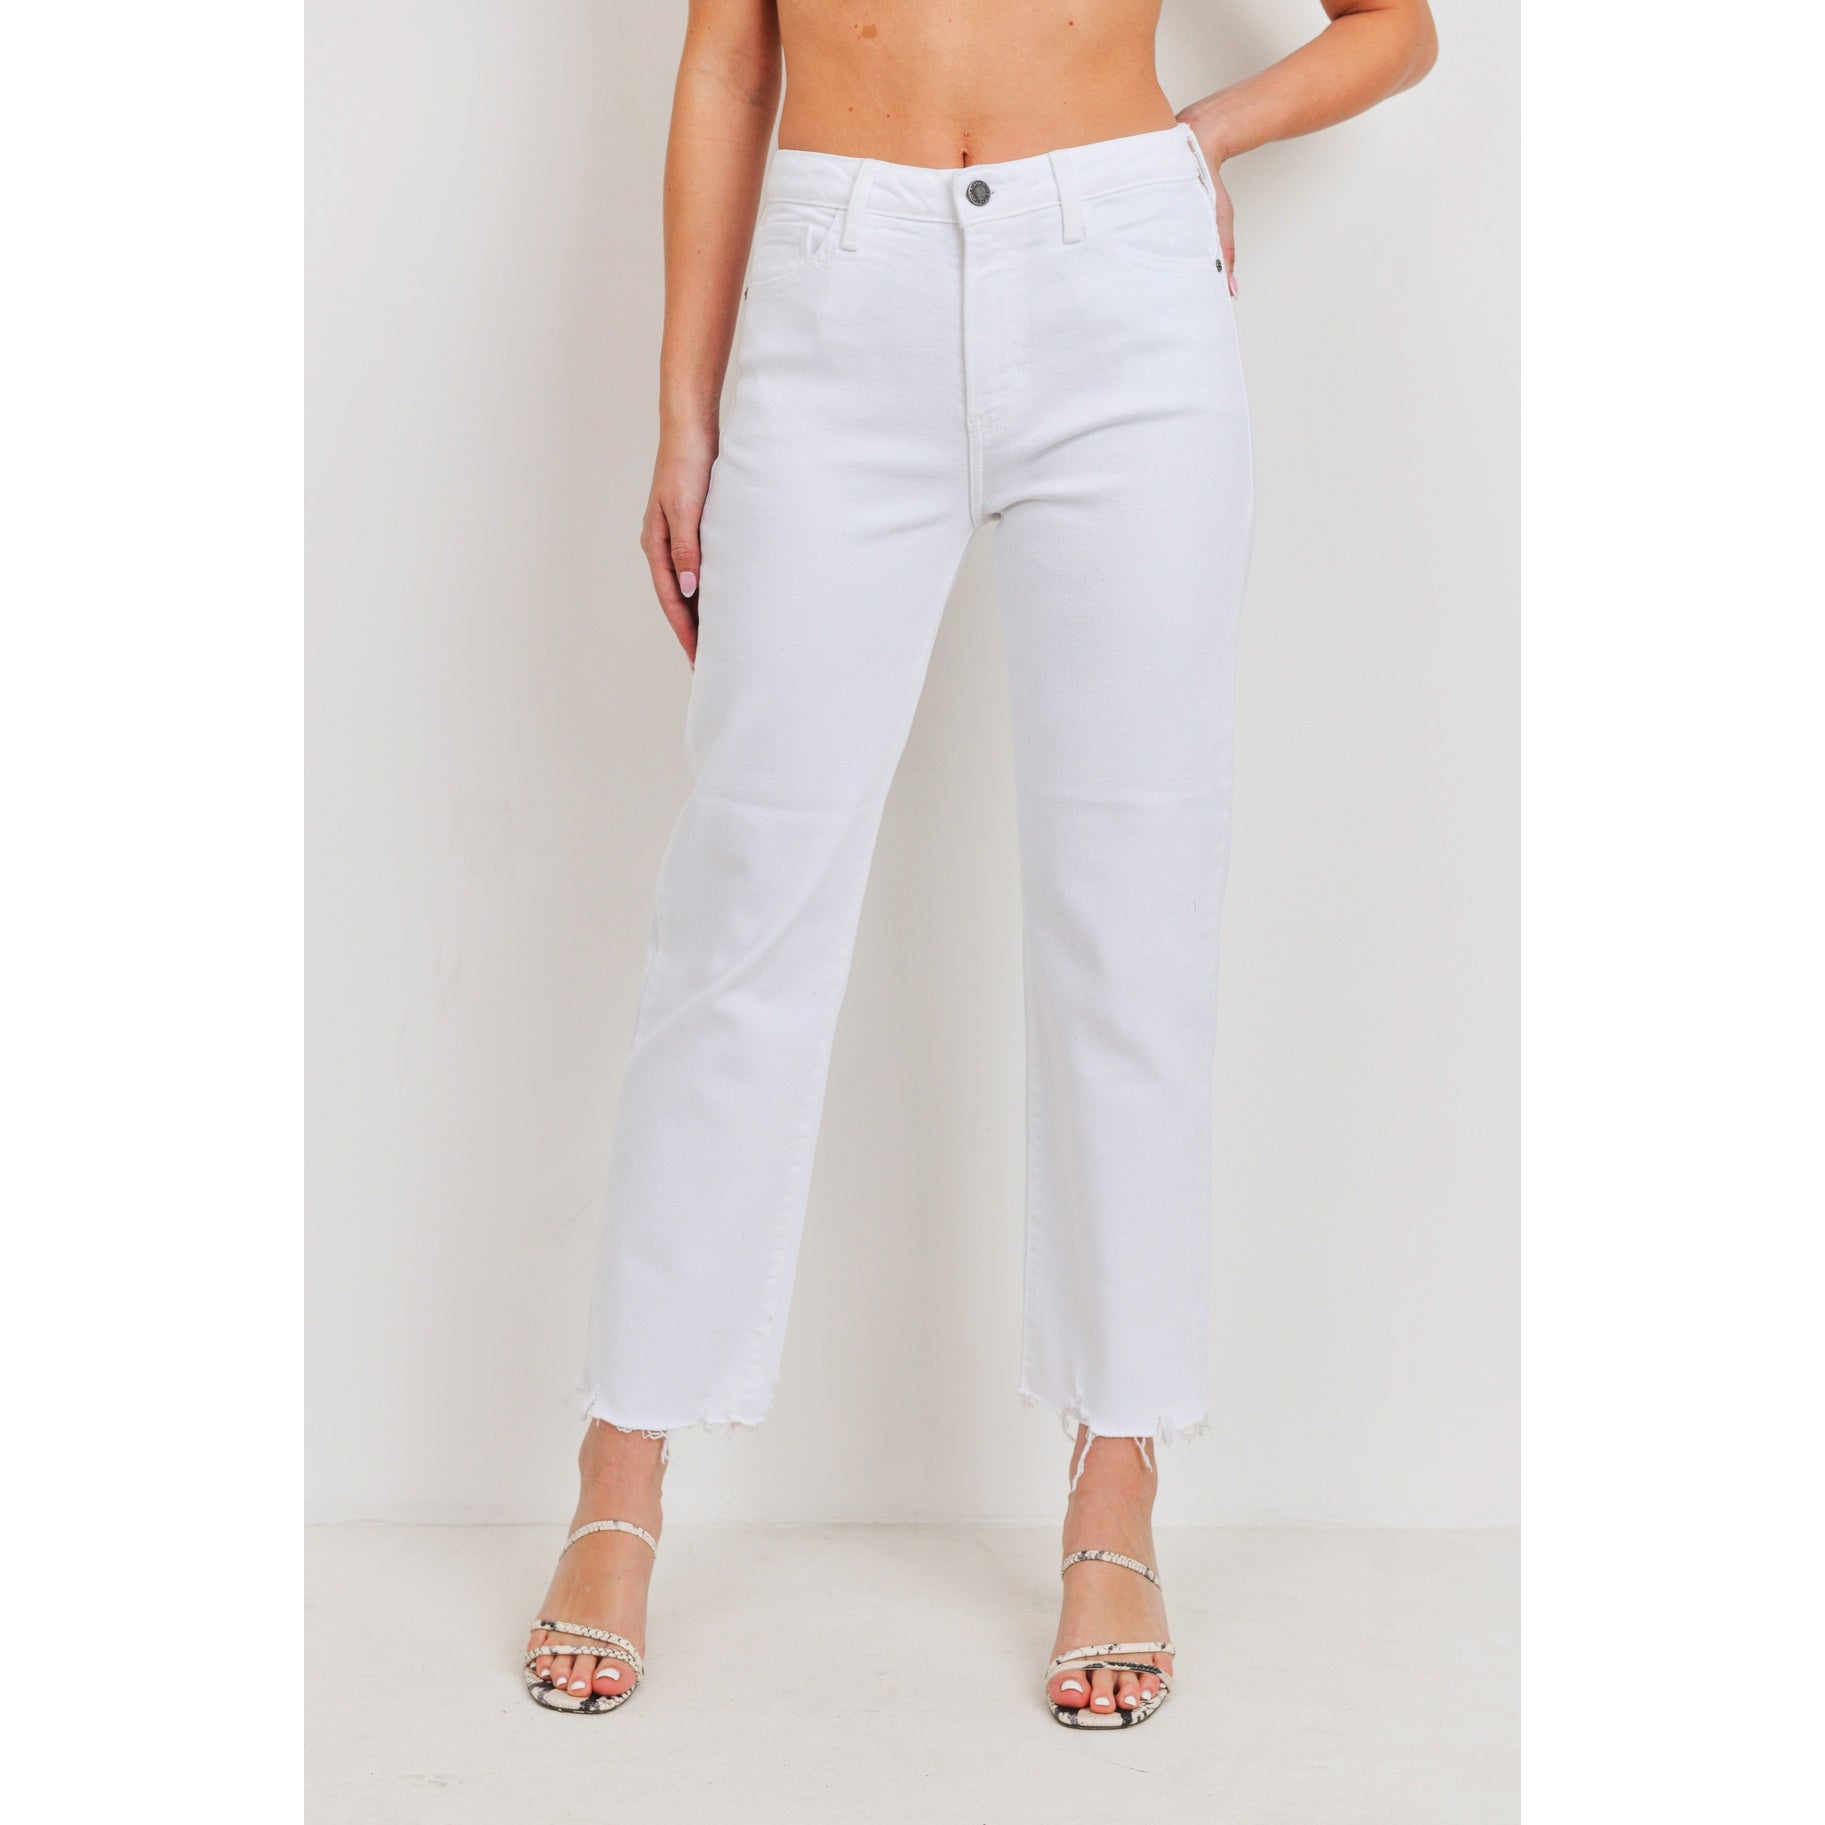 The Hera White High Rise Straight Jeans by Just Black Denim